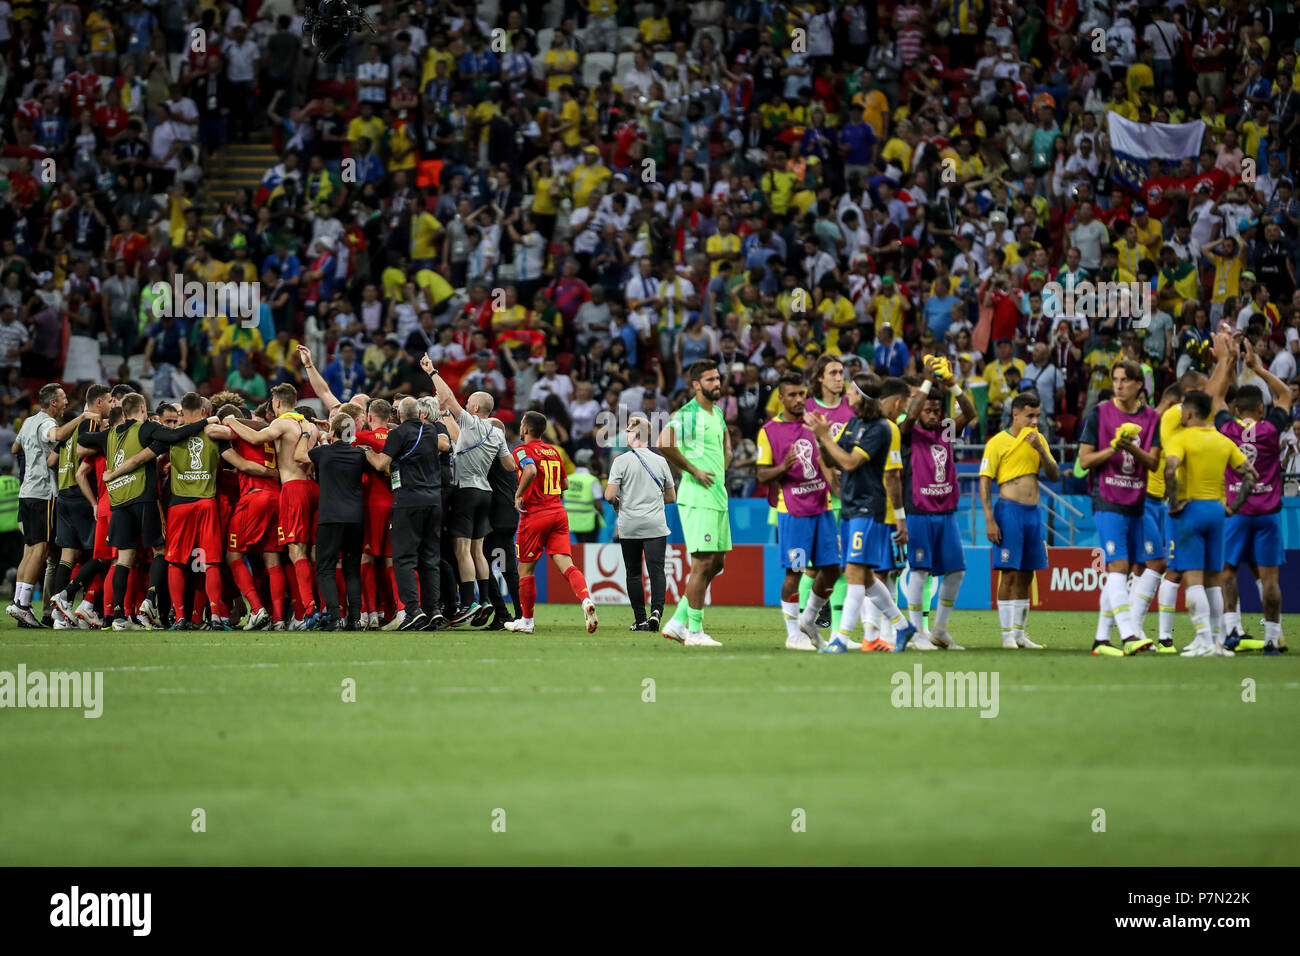 Kazan, Russia. 06th July, 2018. During the match between Brazil and Belgium valid for the quarterfinals of the 2018 World Cup finals, held in Arena Kazan, Russia. Belgium wins 2-1. Credit: Thiago Bernardes/Pacific Press/Alamy Live News Stock Photo